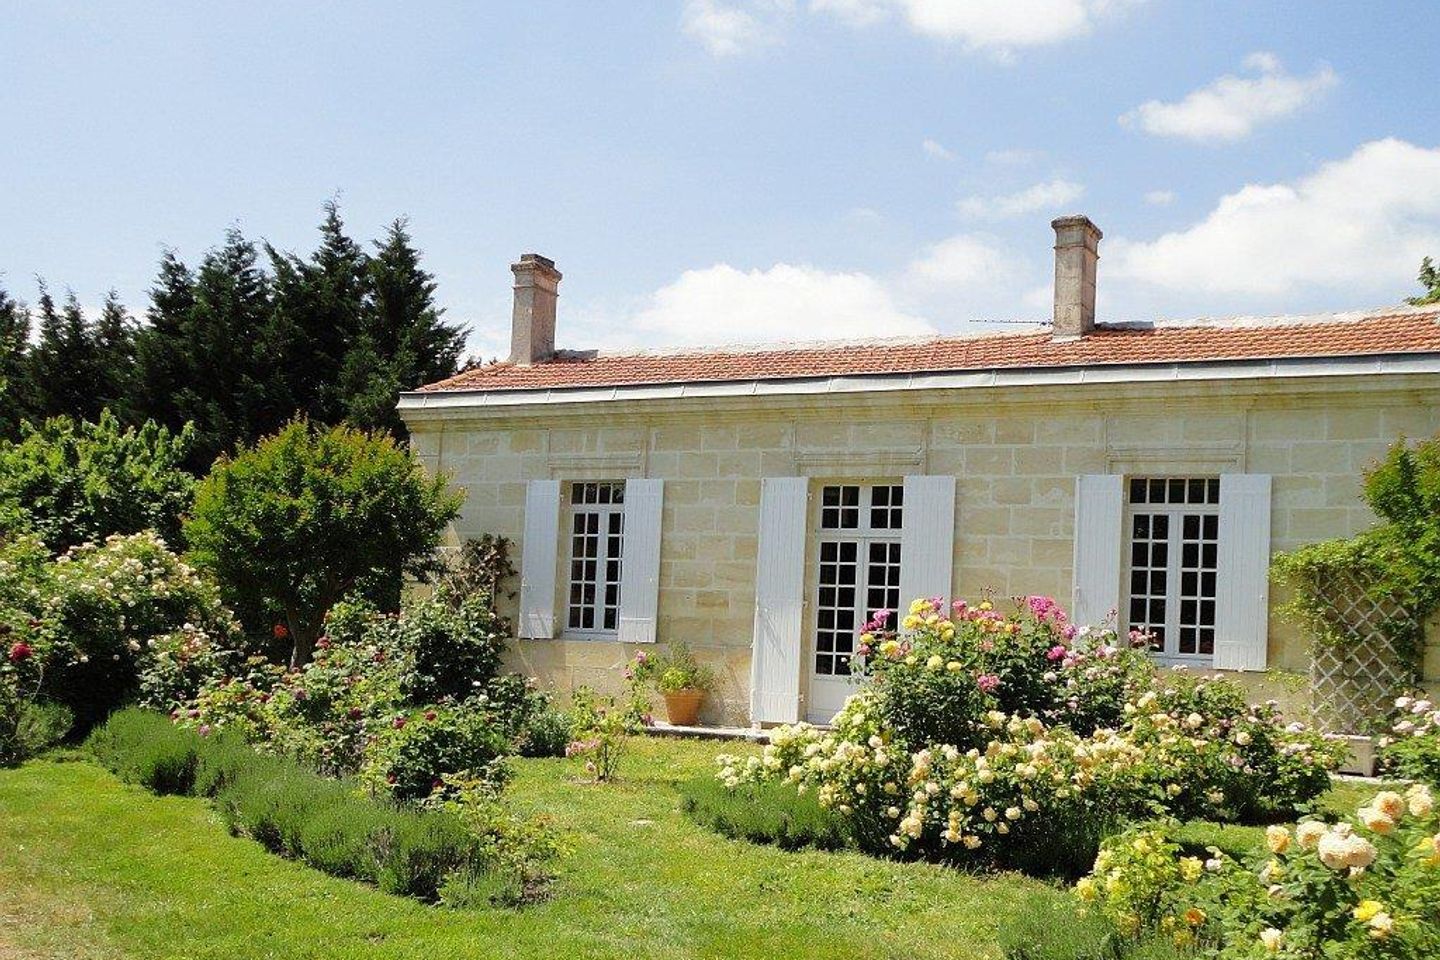 Excellent 2 Bed House With 2 Substantial Outbuildings On 3 Hectares For Sale Nea, Flaujagues, Gironde, France